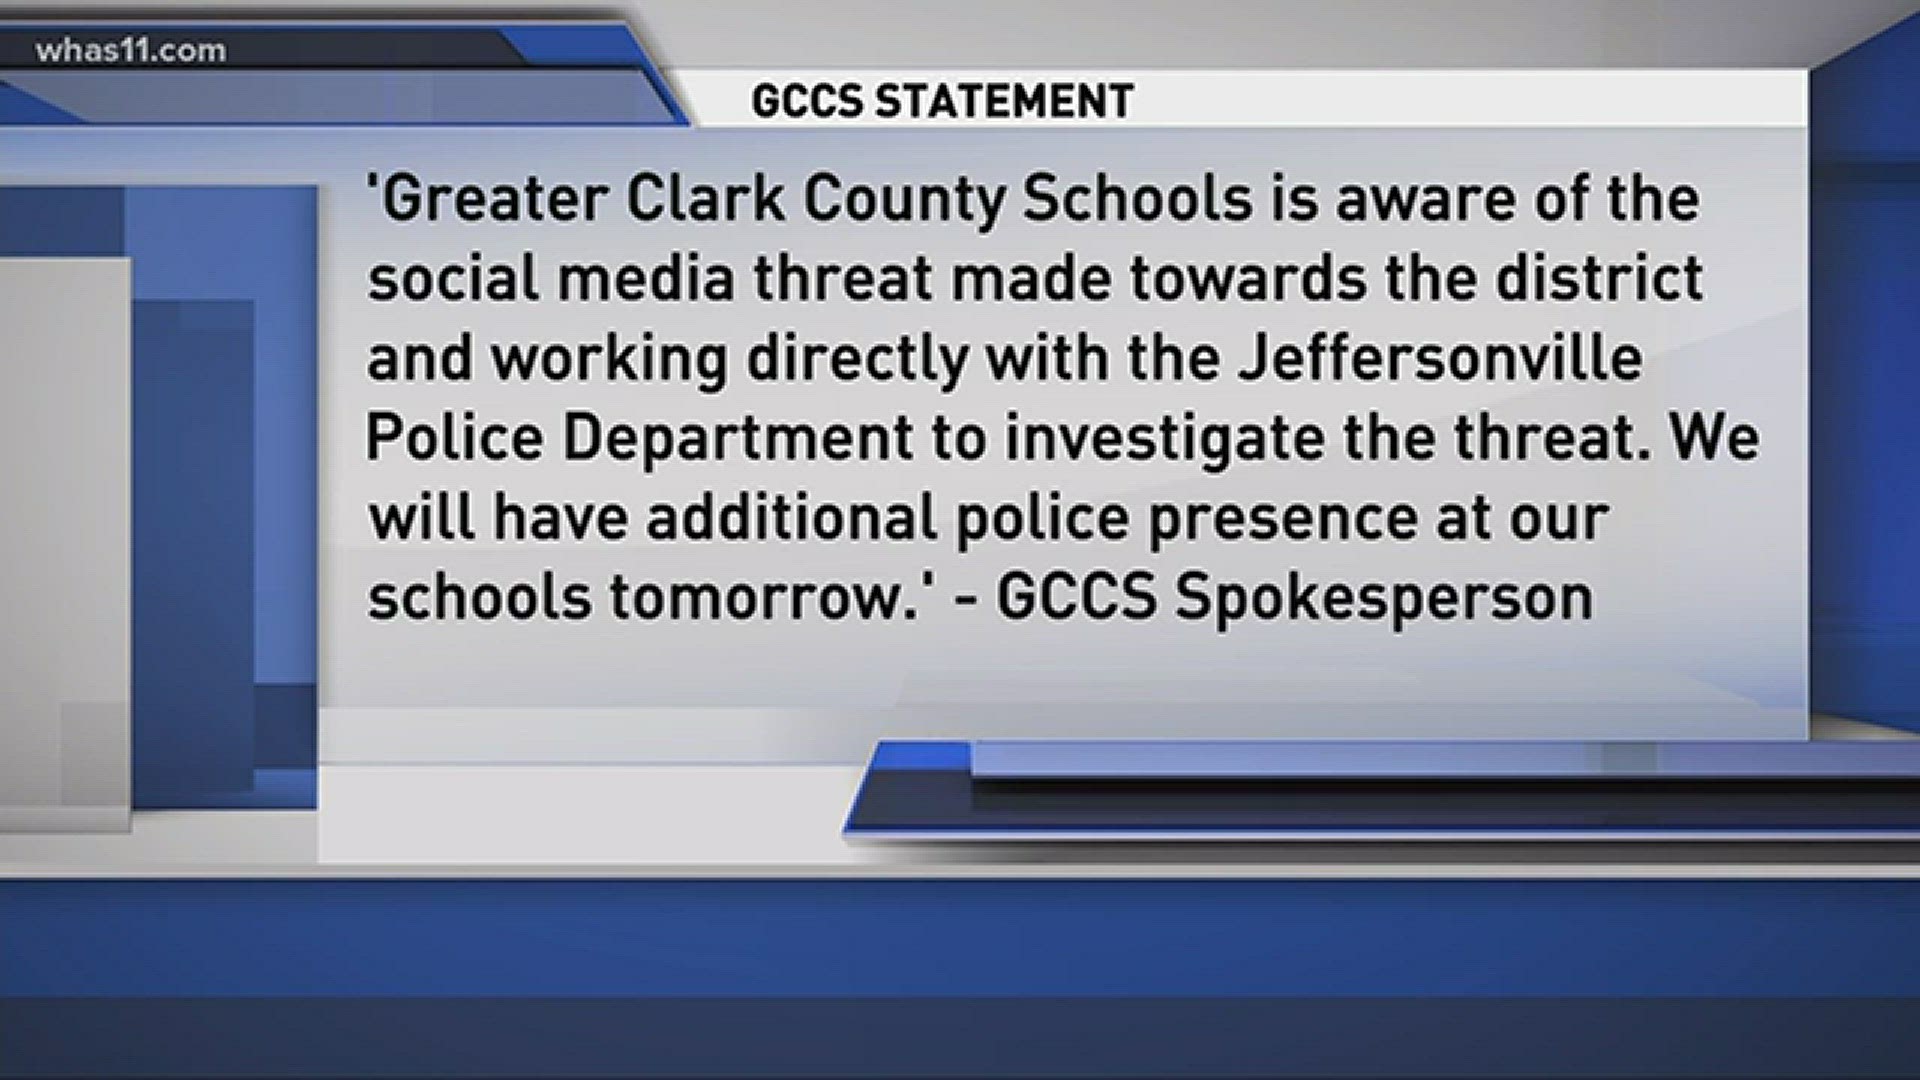 Indiana authorities working to investigate social media threats to schools